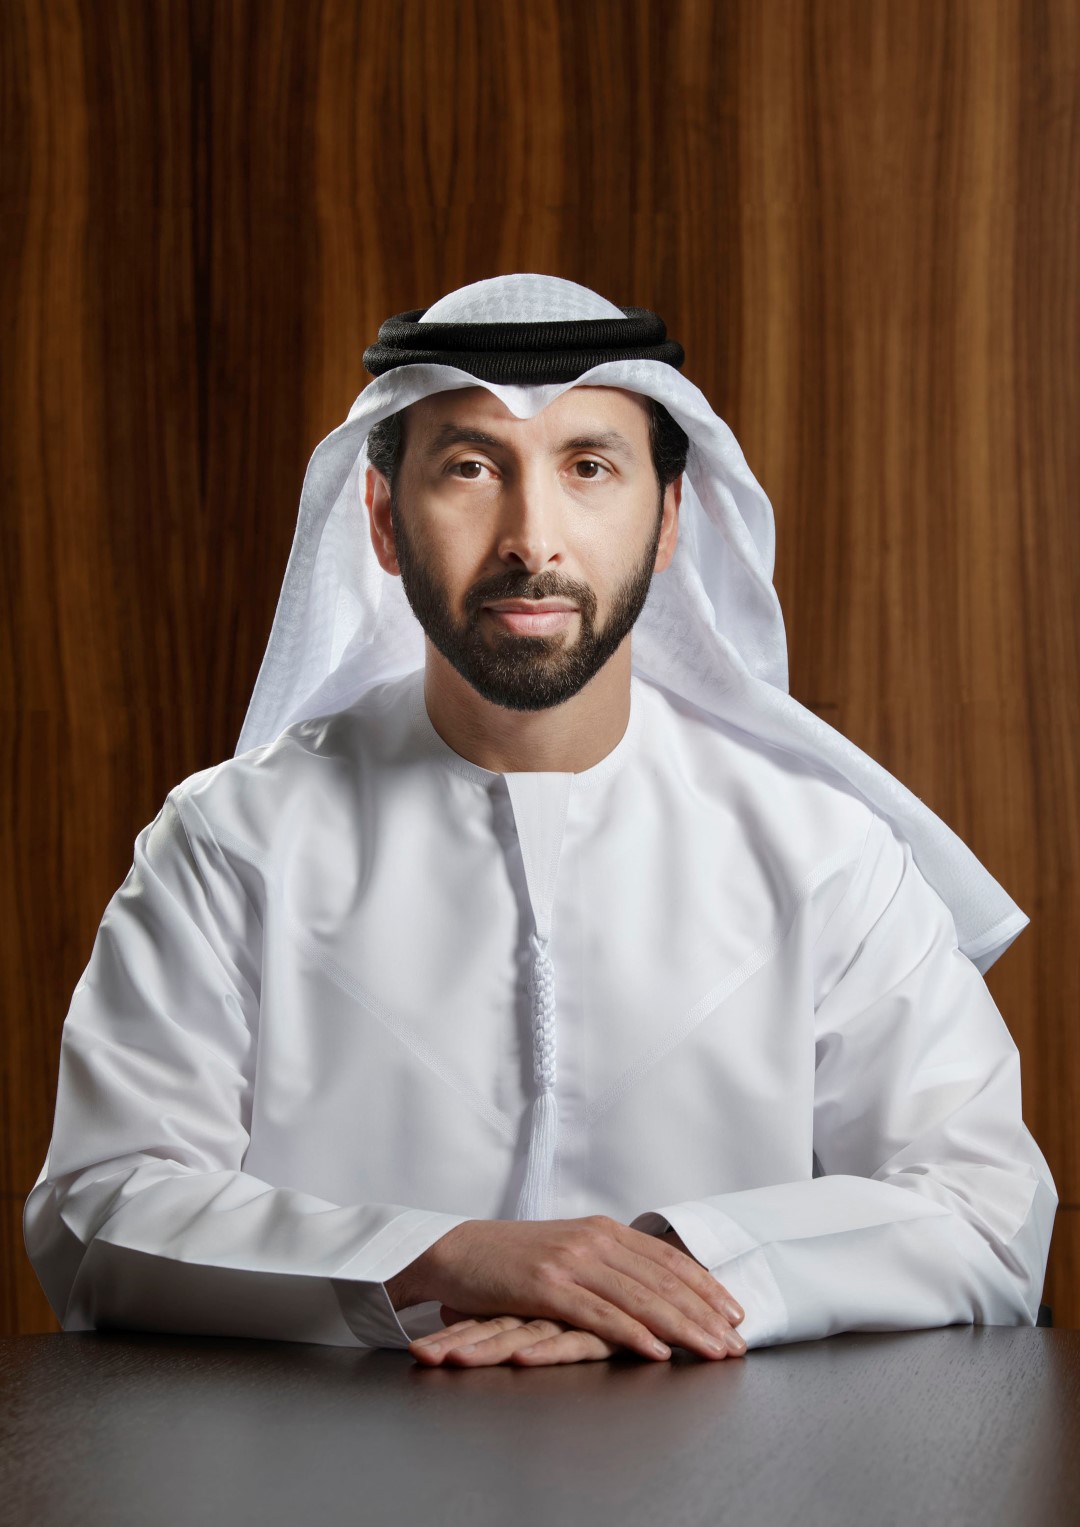 Mubadala Health Aims To Boost Emirati Nursing Numbers To Support Sustainable Healthcare Sector